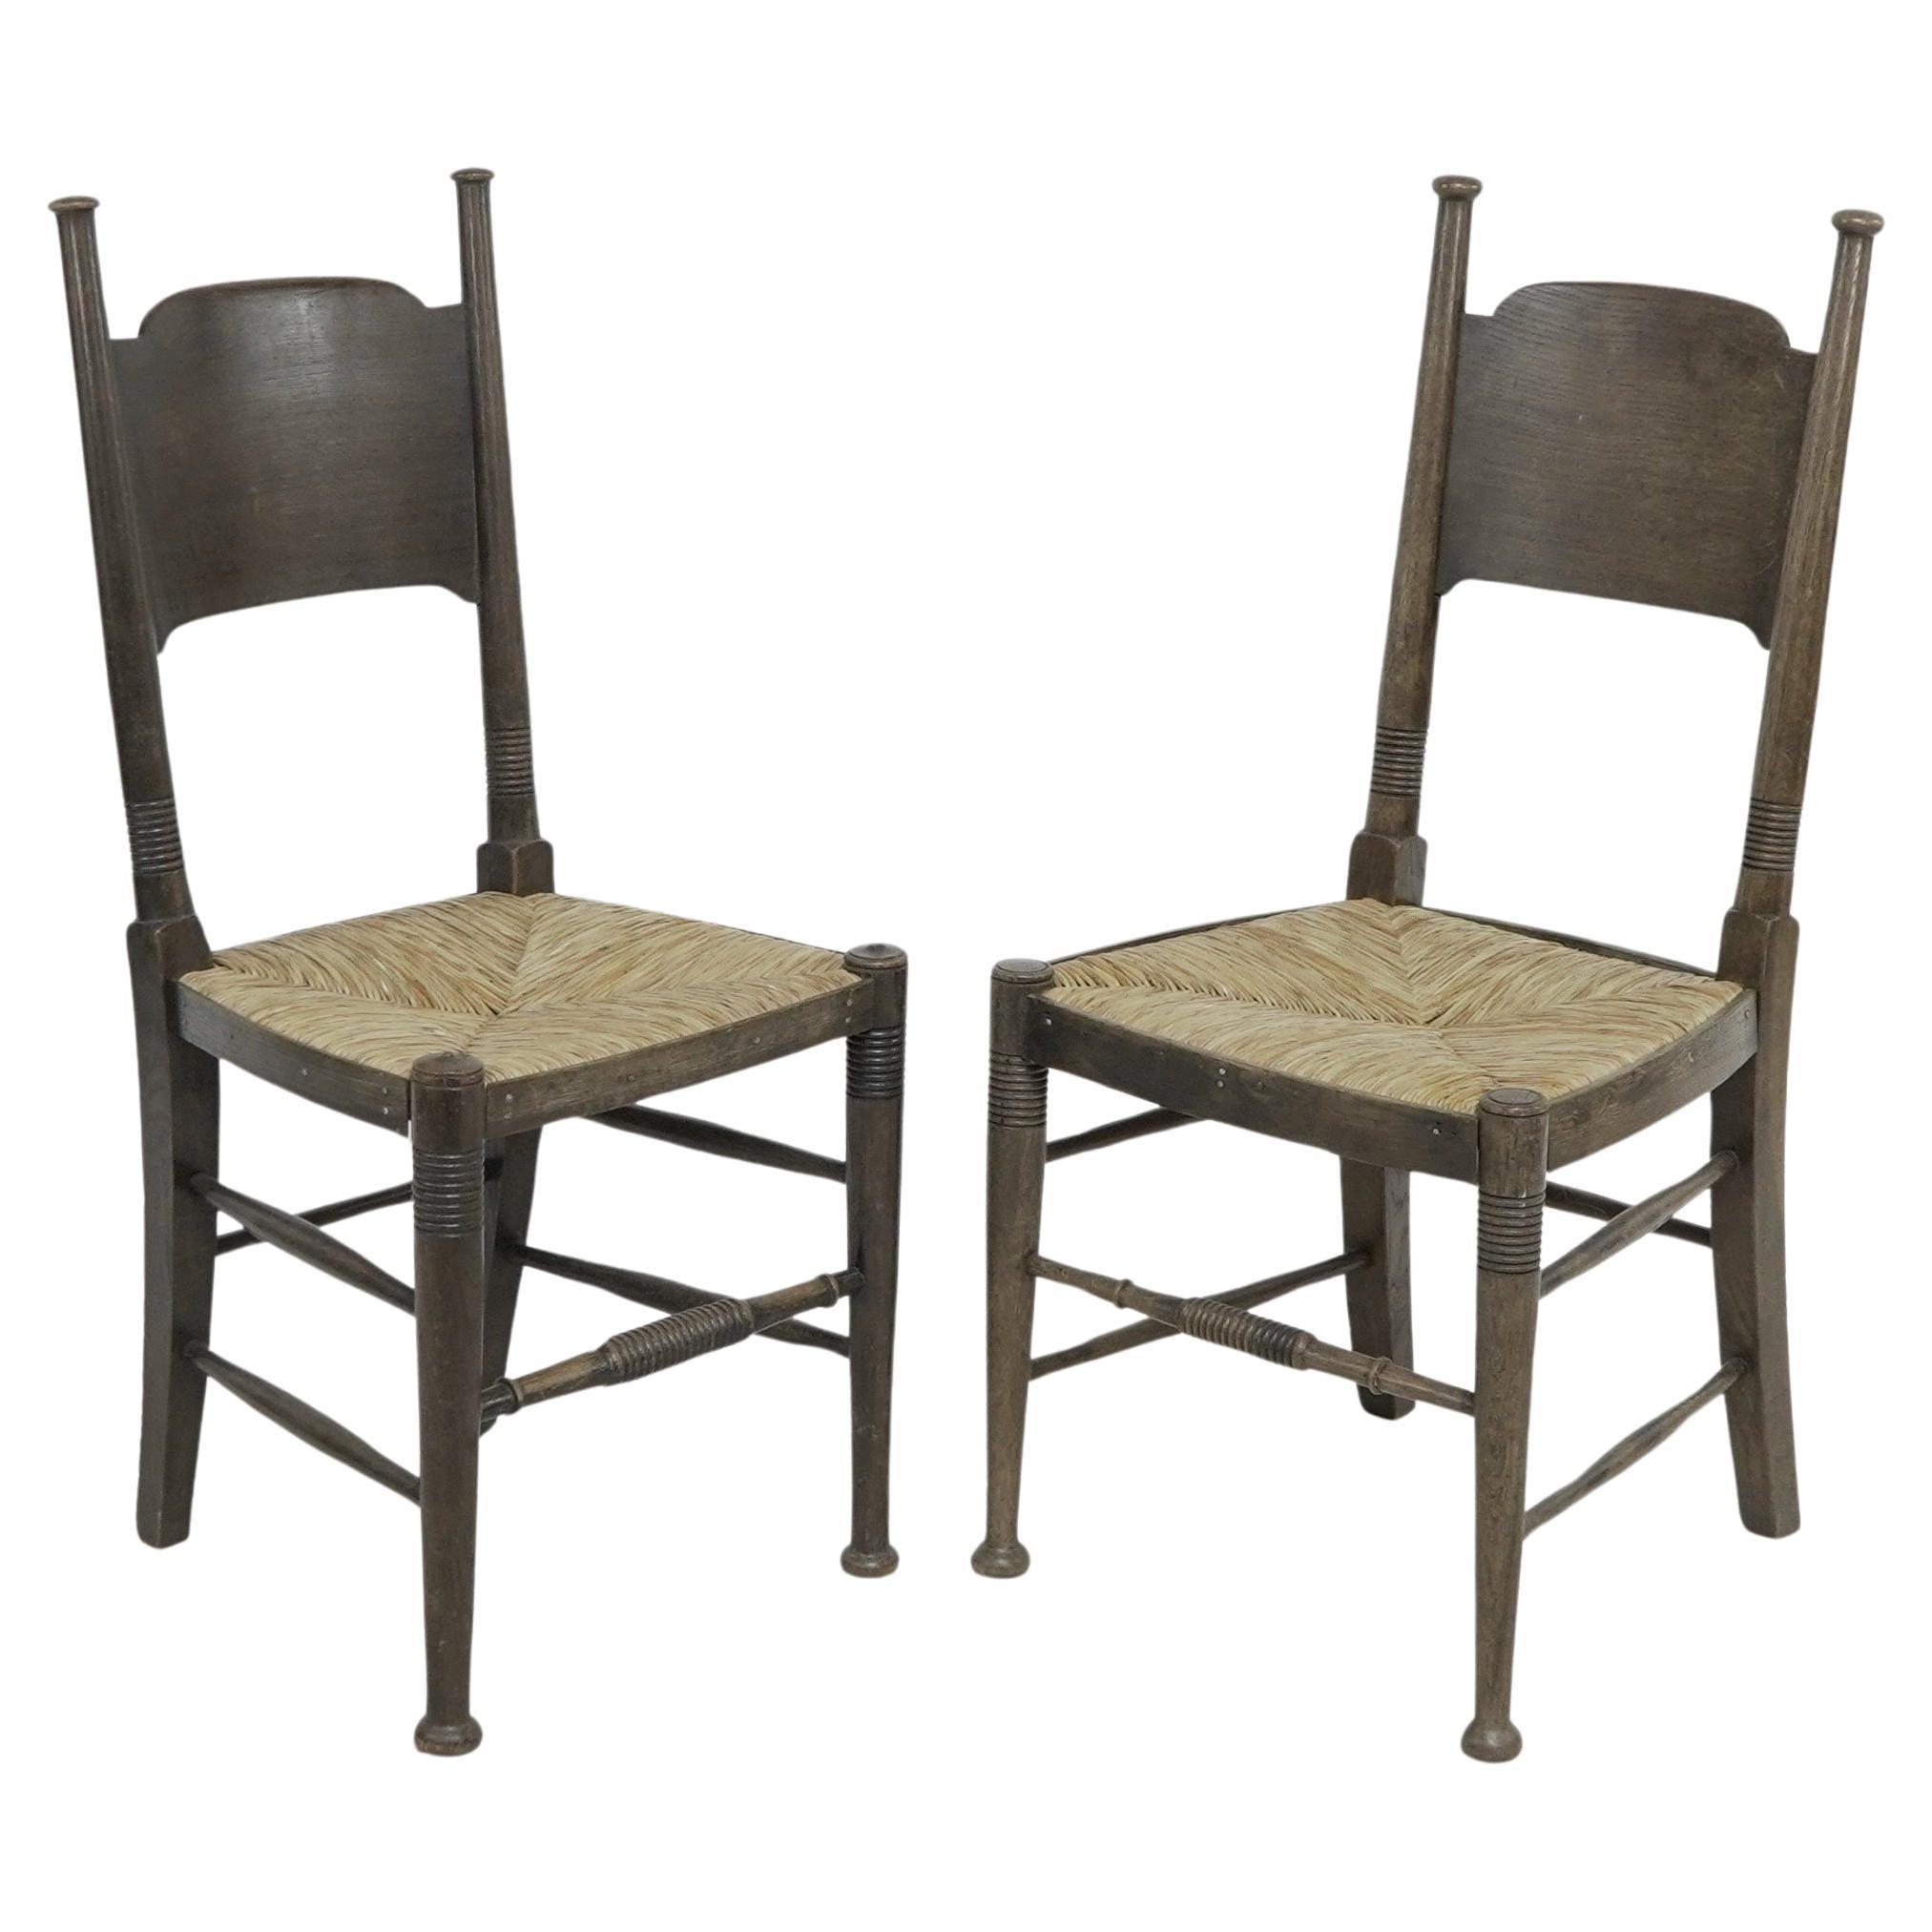 William Birch, retailed by Liberty & Co. Pair of Arts & Crafts oak dining chairs For Sale